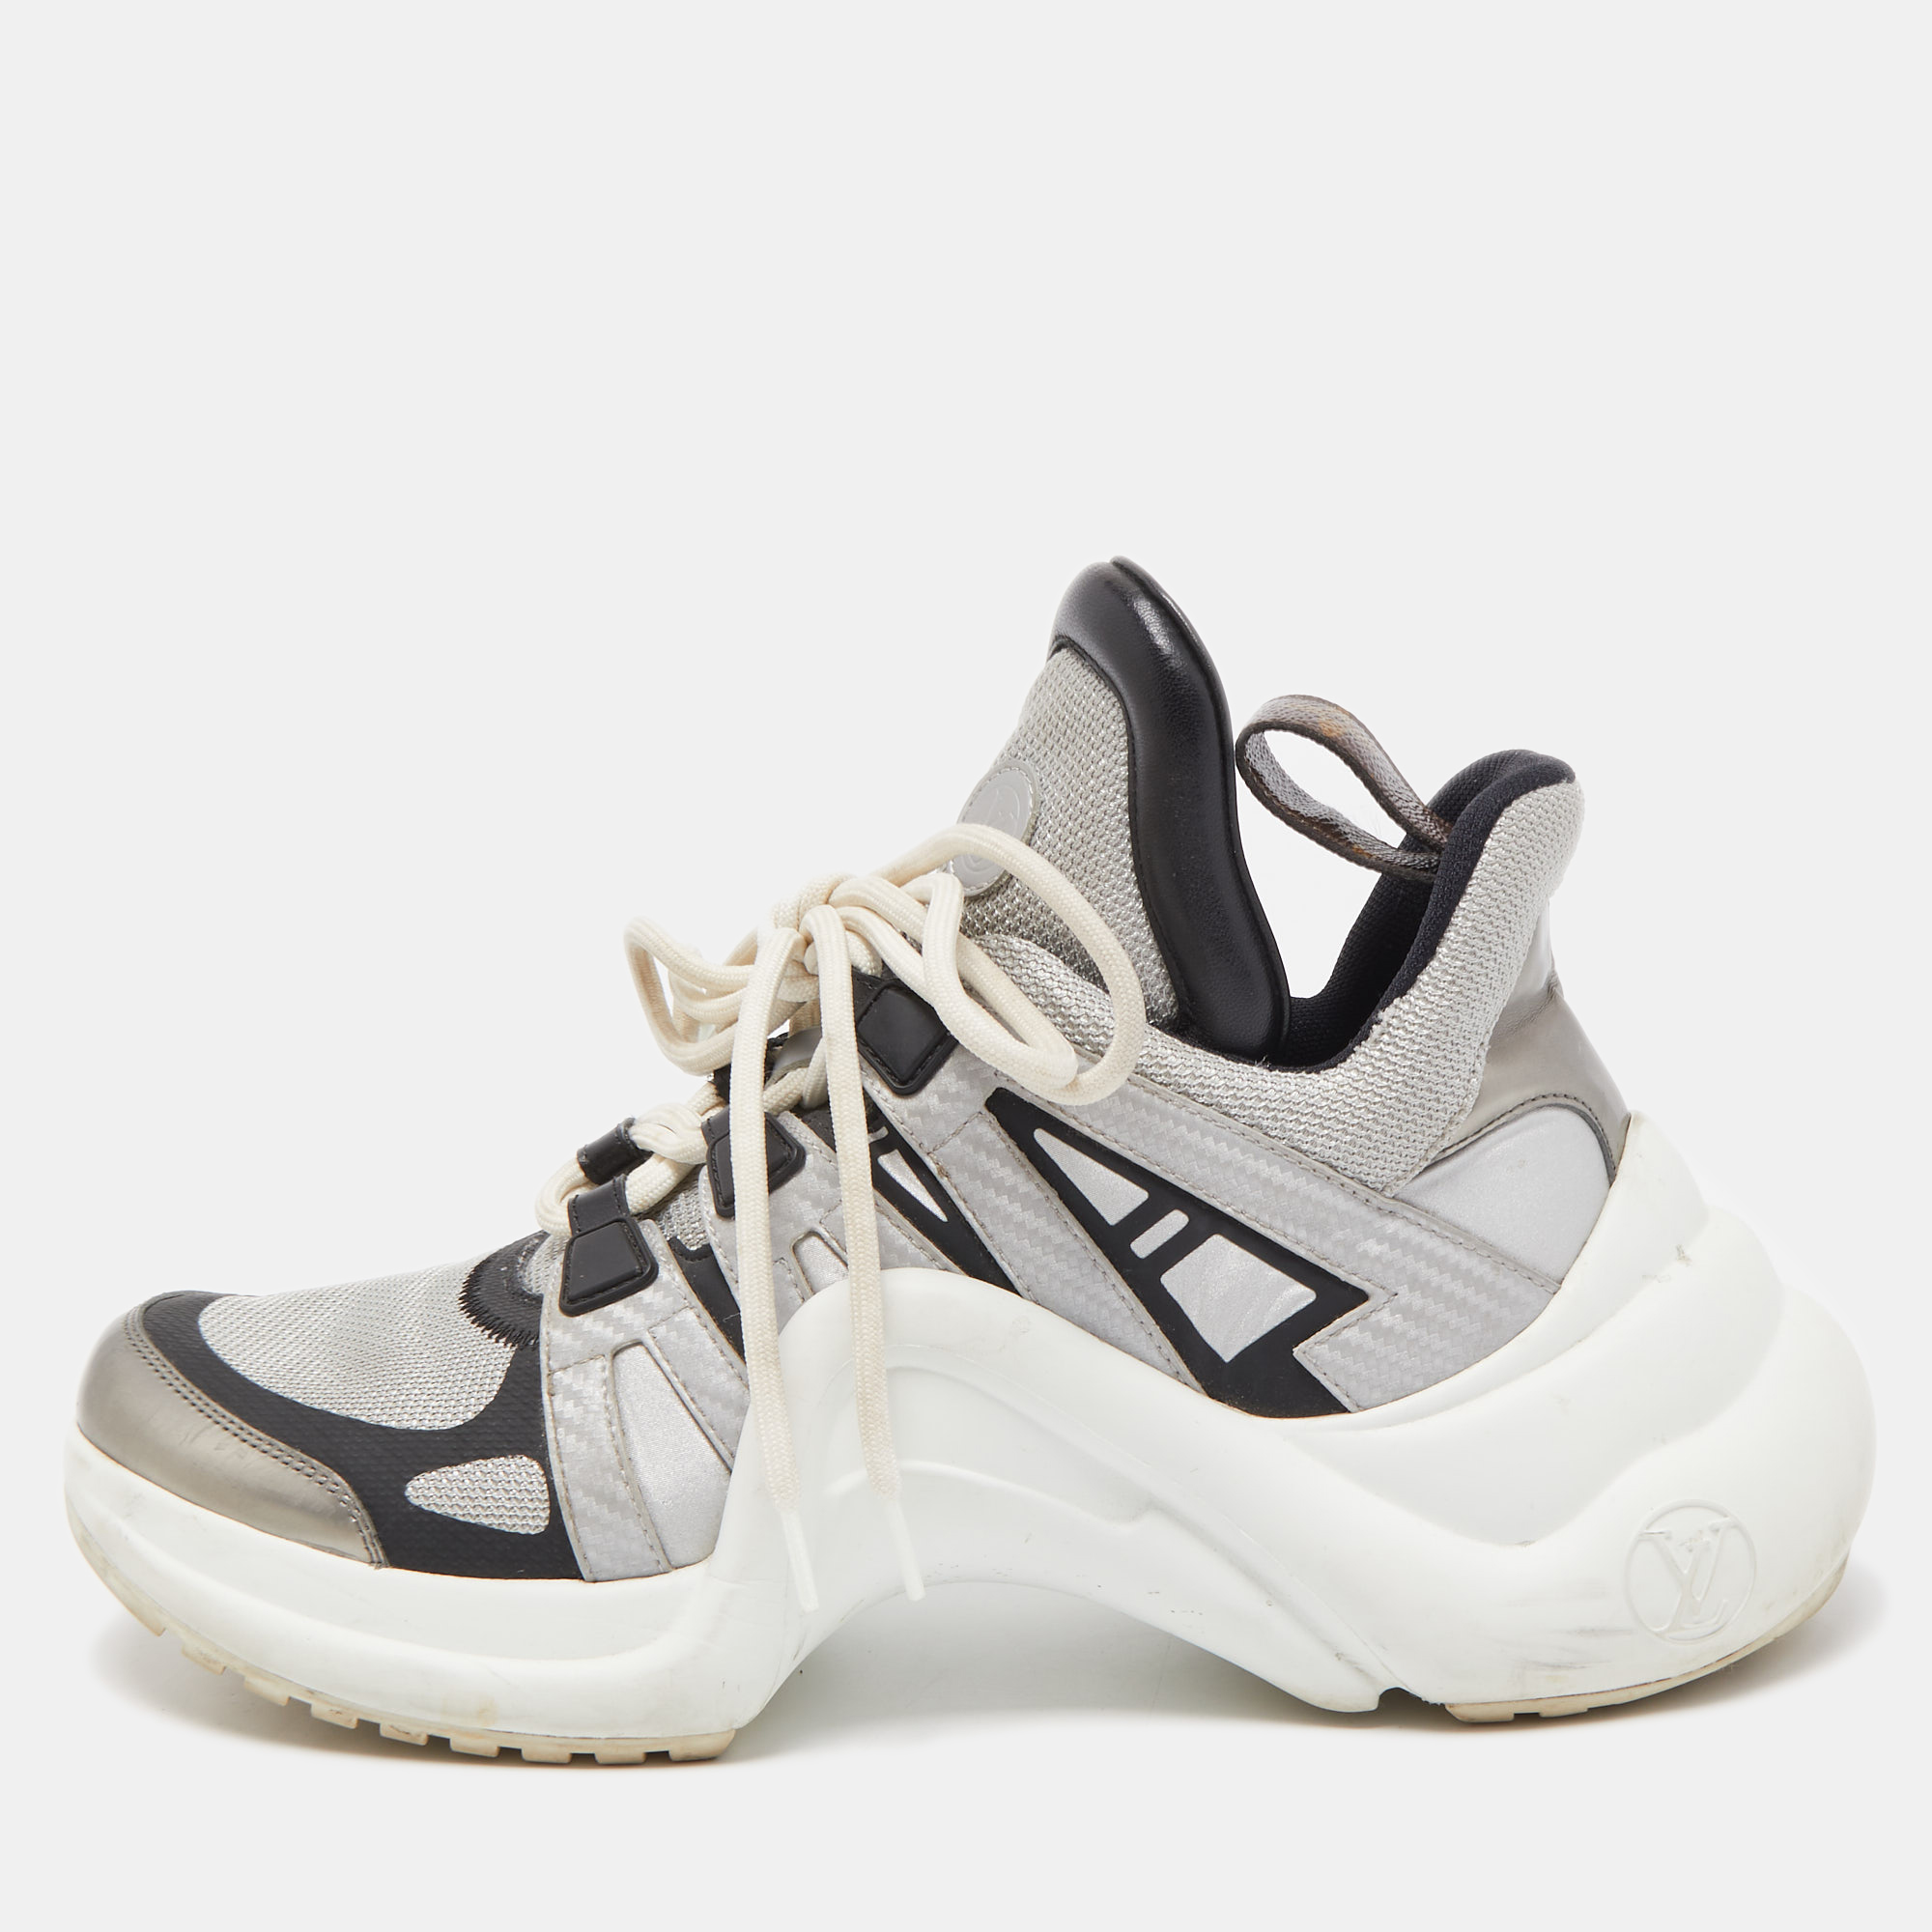 Louis Vuitton Archlight Sneakers - Current Season / Sold Out SIZE